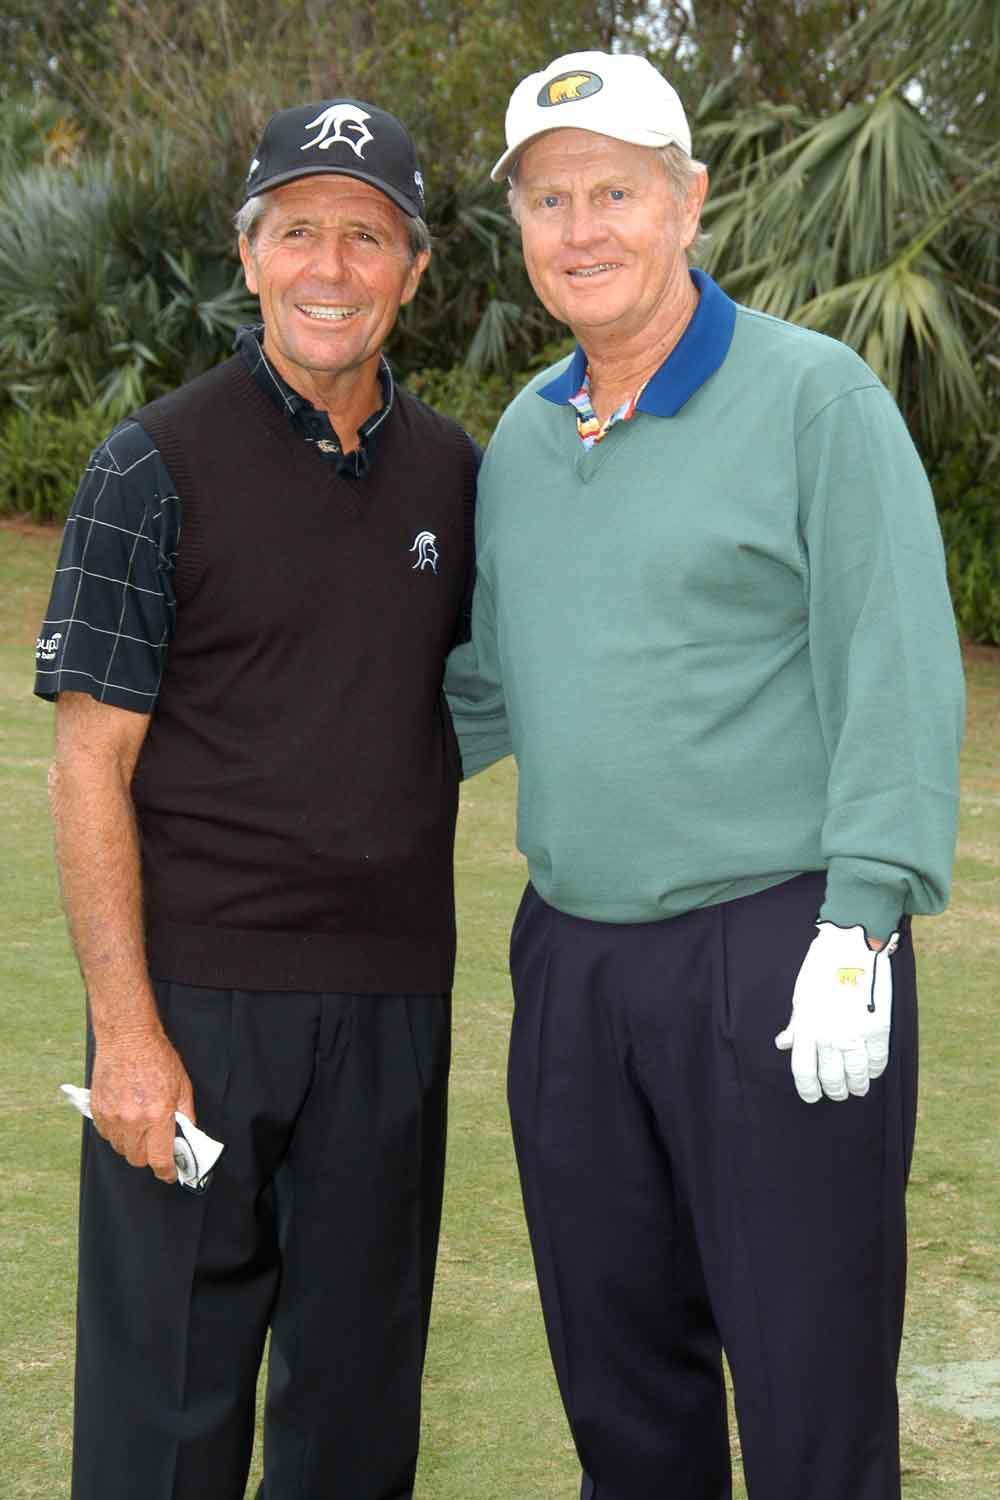 Gary Palmer and Jack Nicklaus, two Legends of Golf